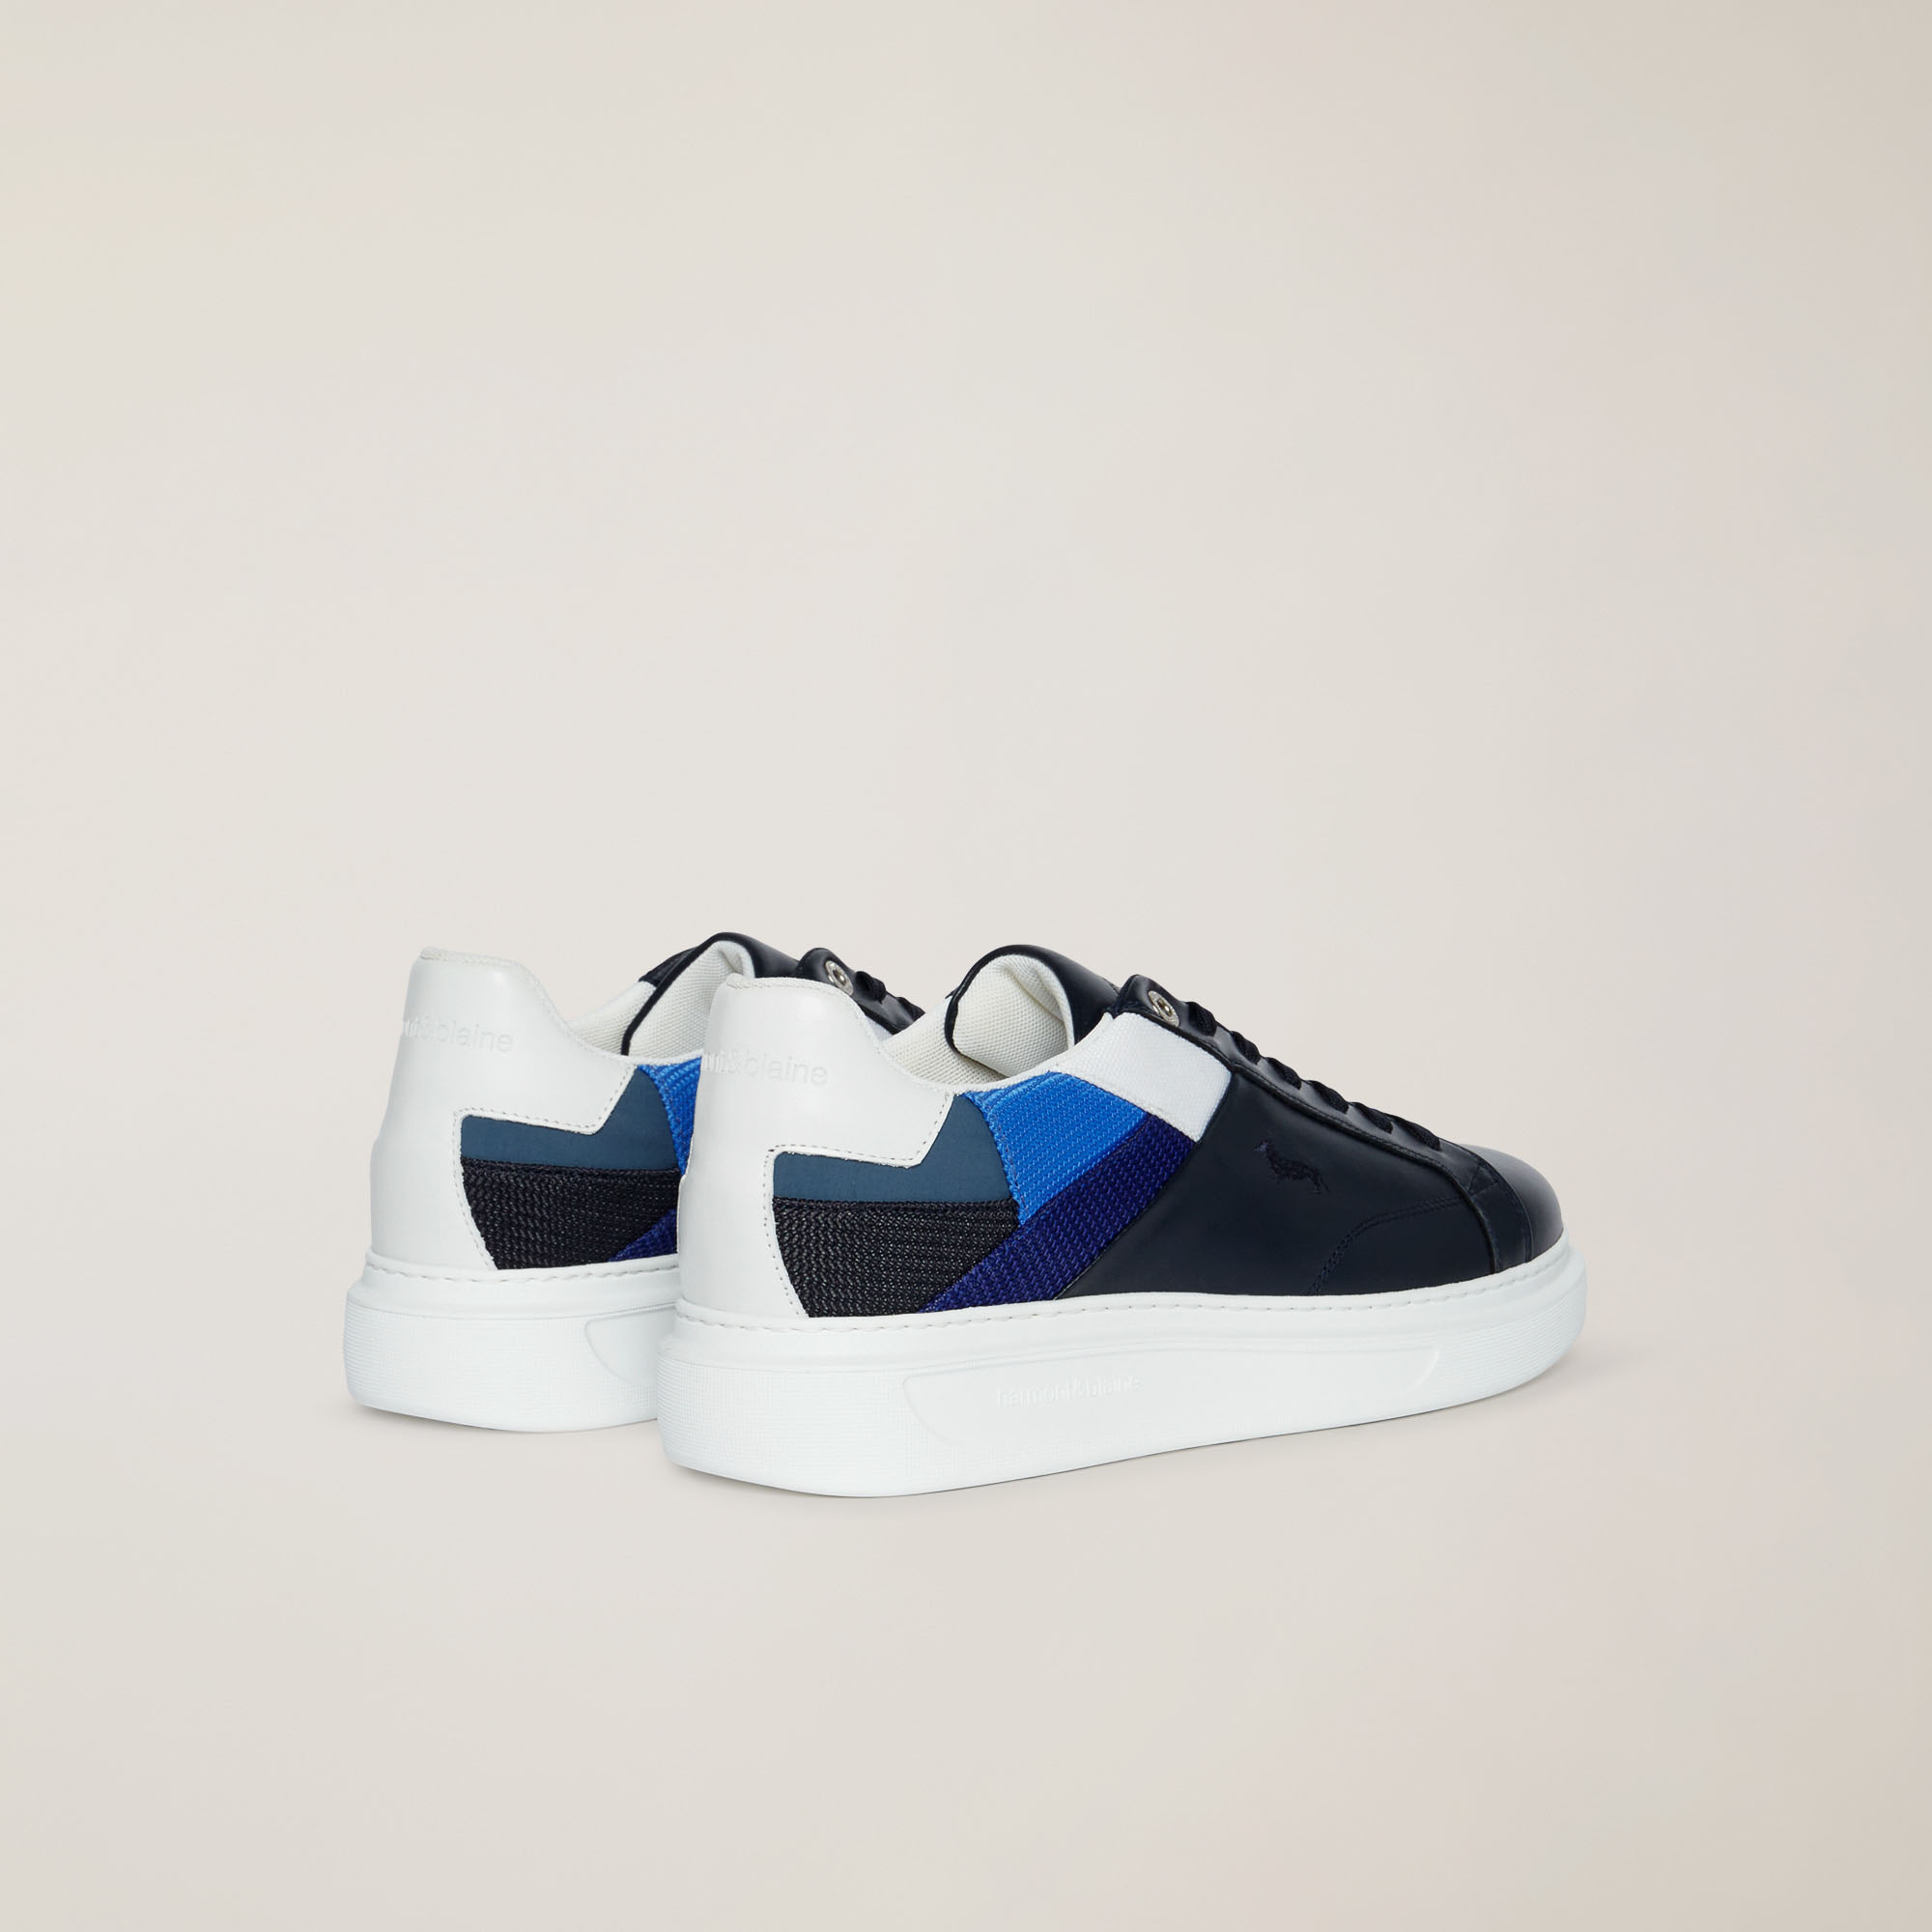 Sneaker with Patchwork Inserts, Blue/Multicolor, large image number 2